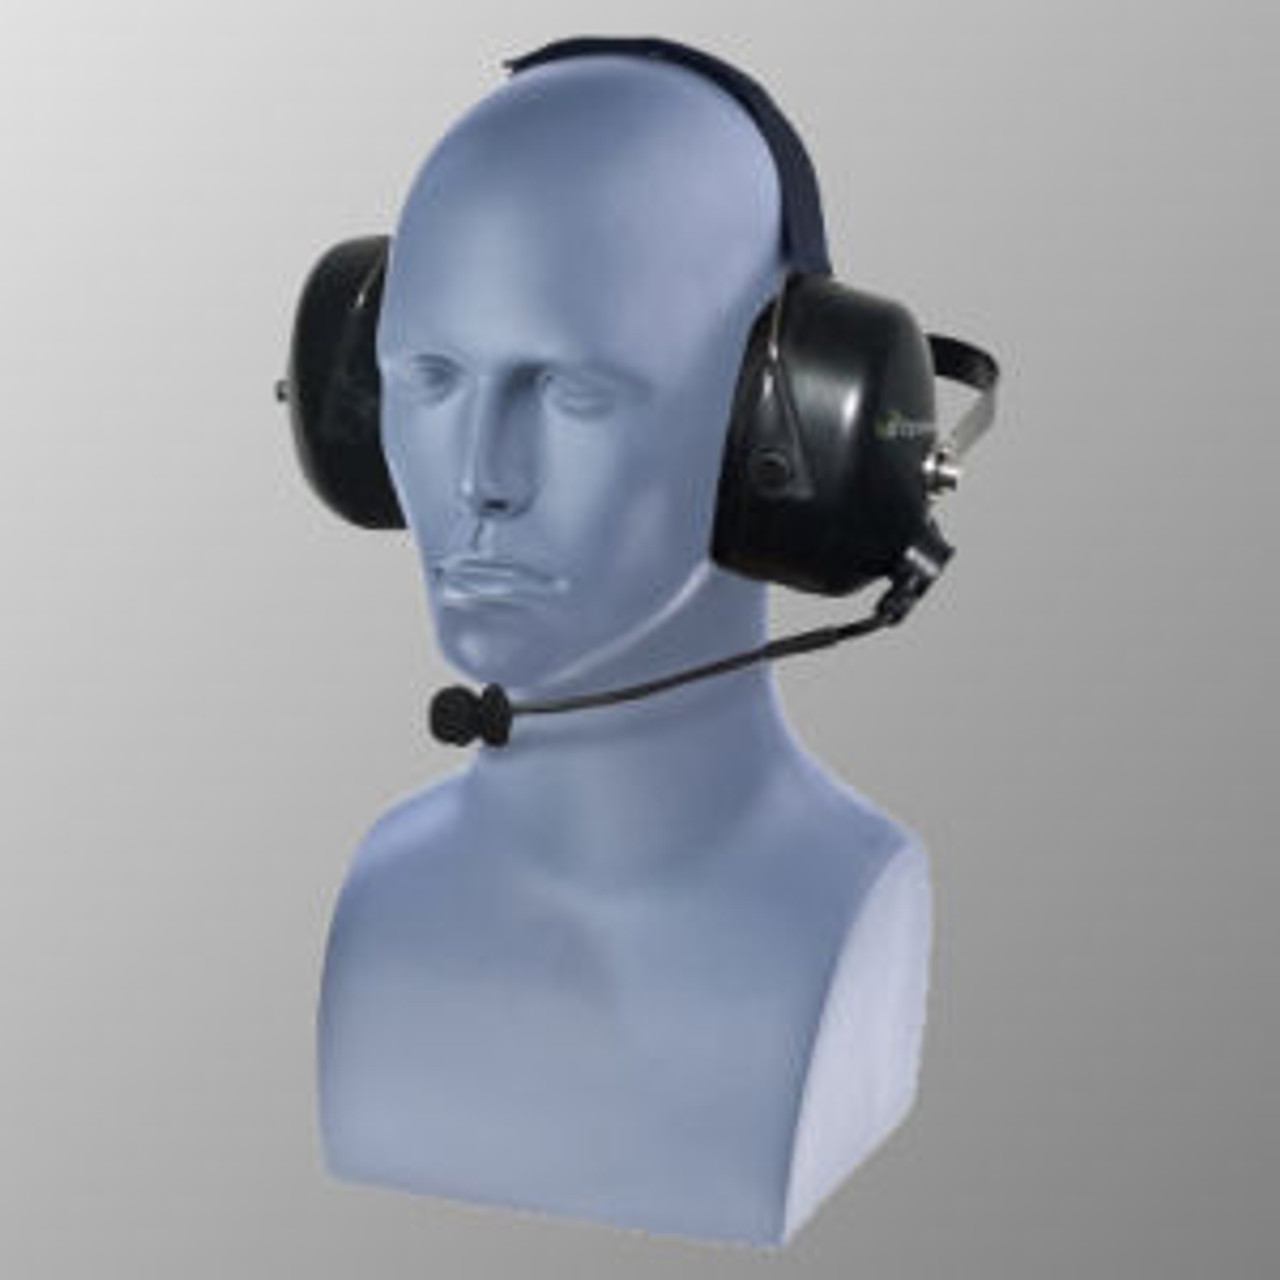 Harris P7370 Noise Canceling Double Muff Behind The Head Headset